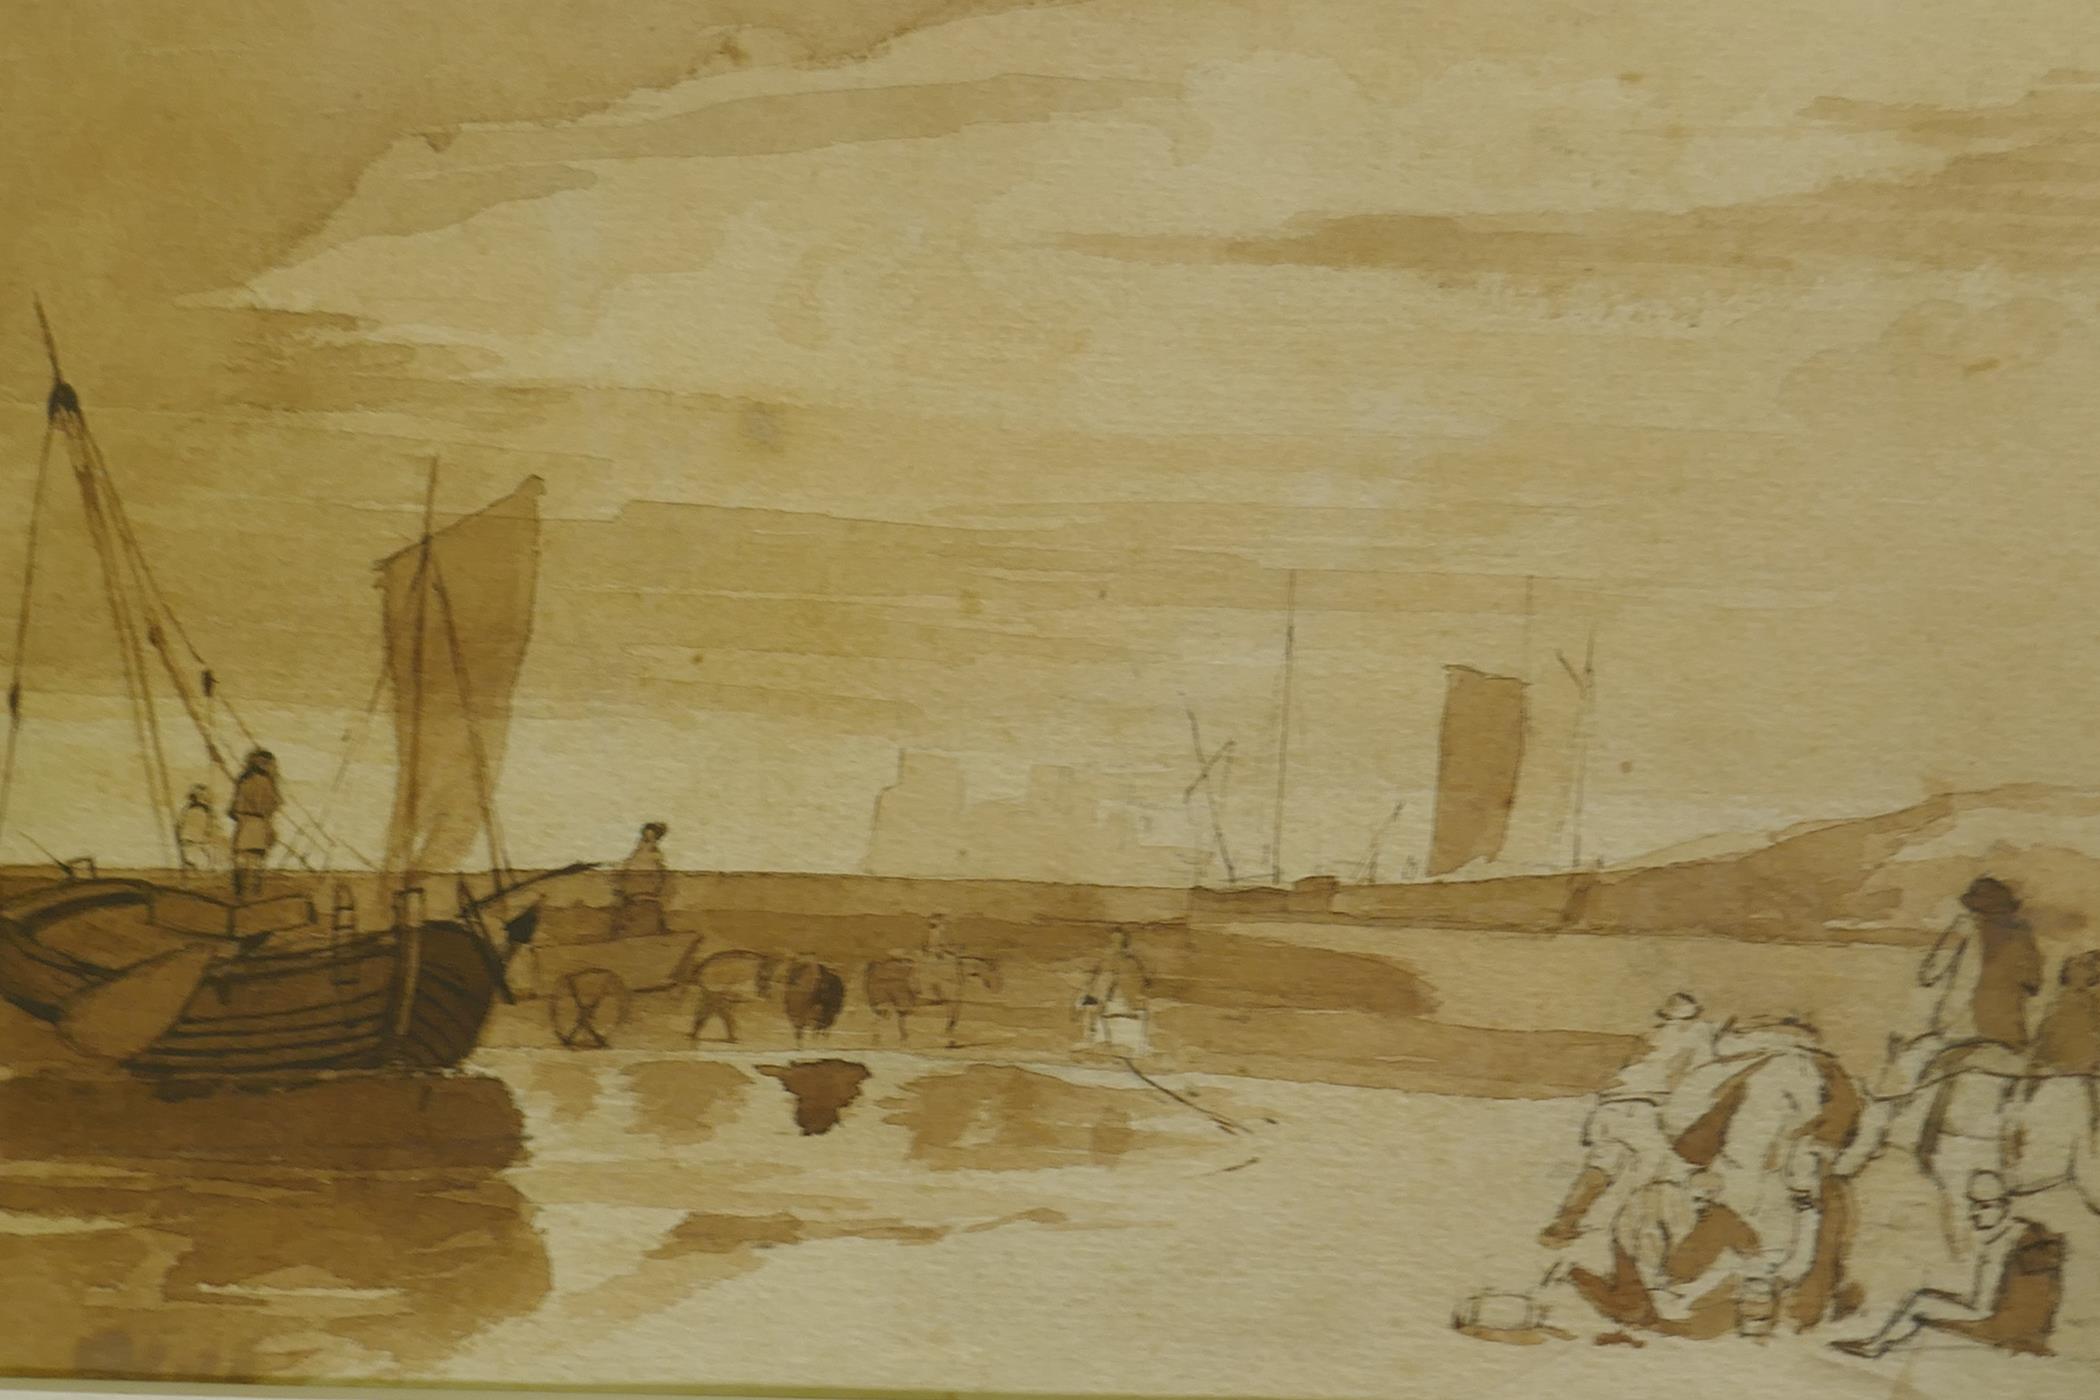 A collection of C19th and later watercolours, beach scene with fisher folk, 16 x 25cm; view of a - Image 3 of 9